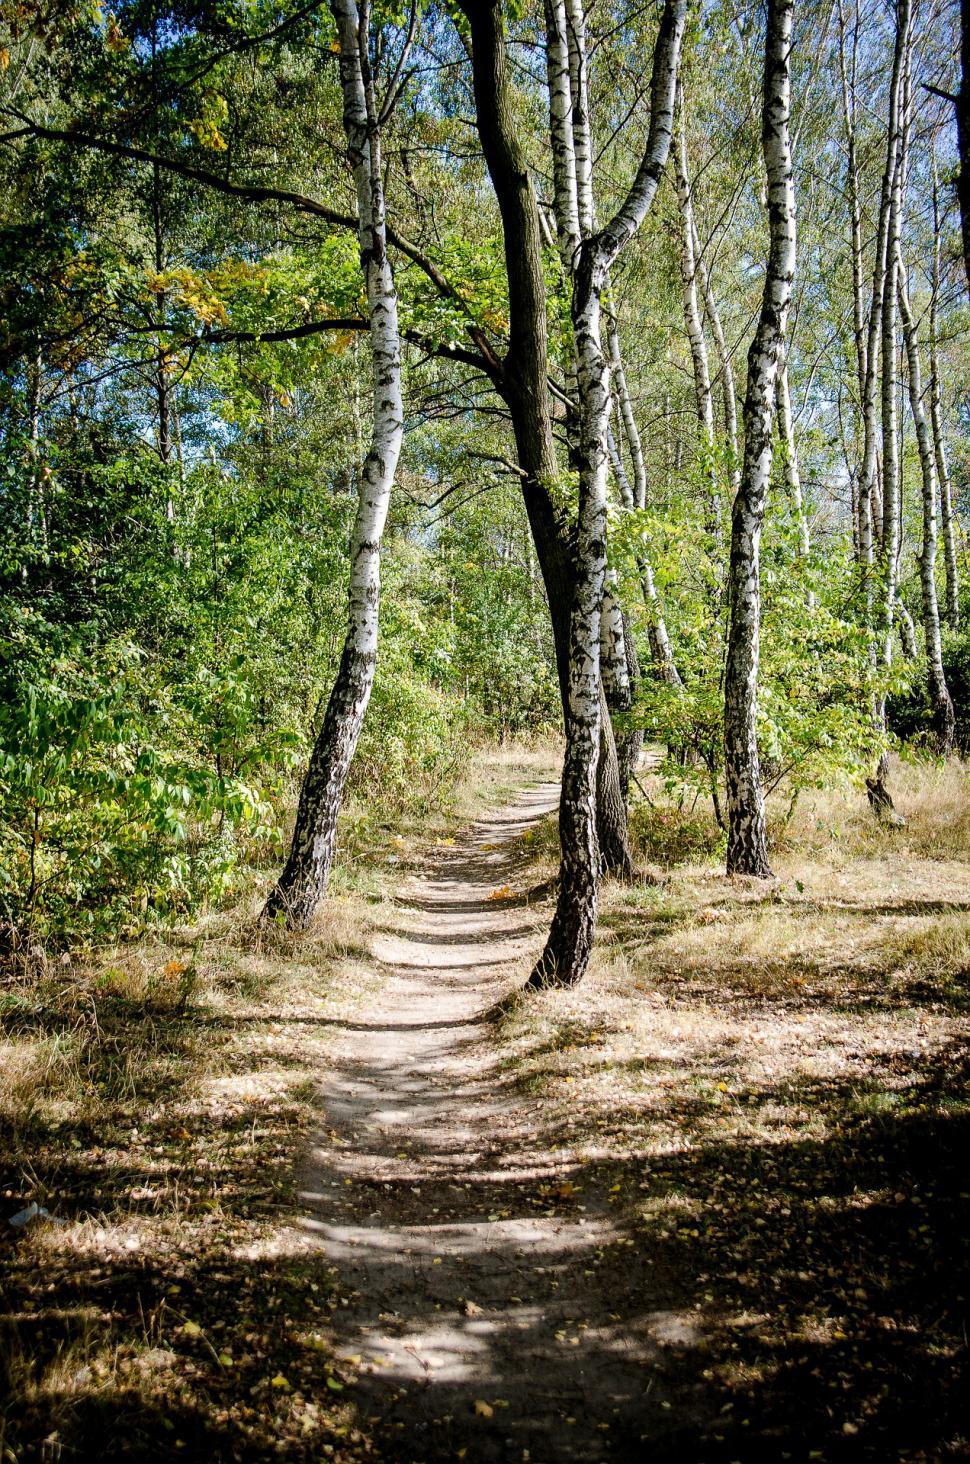 Free Image of Dirt Path Through Forest 